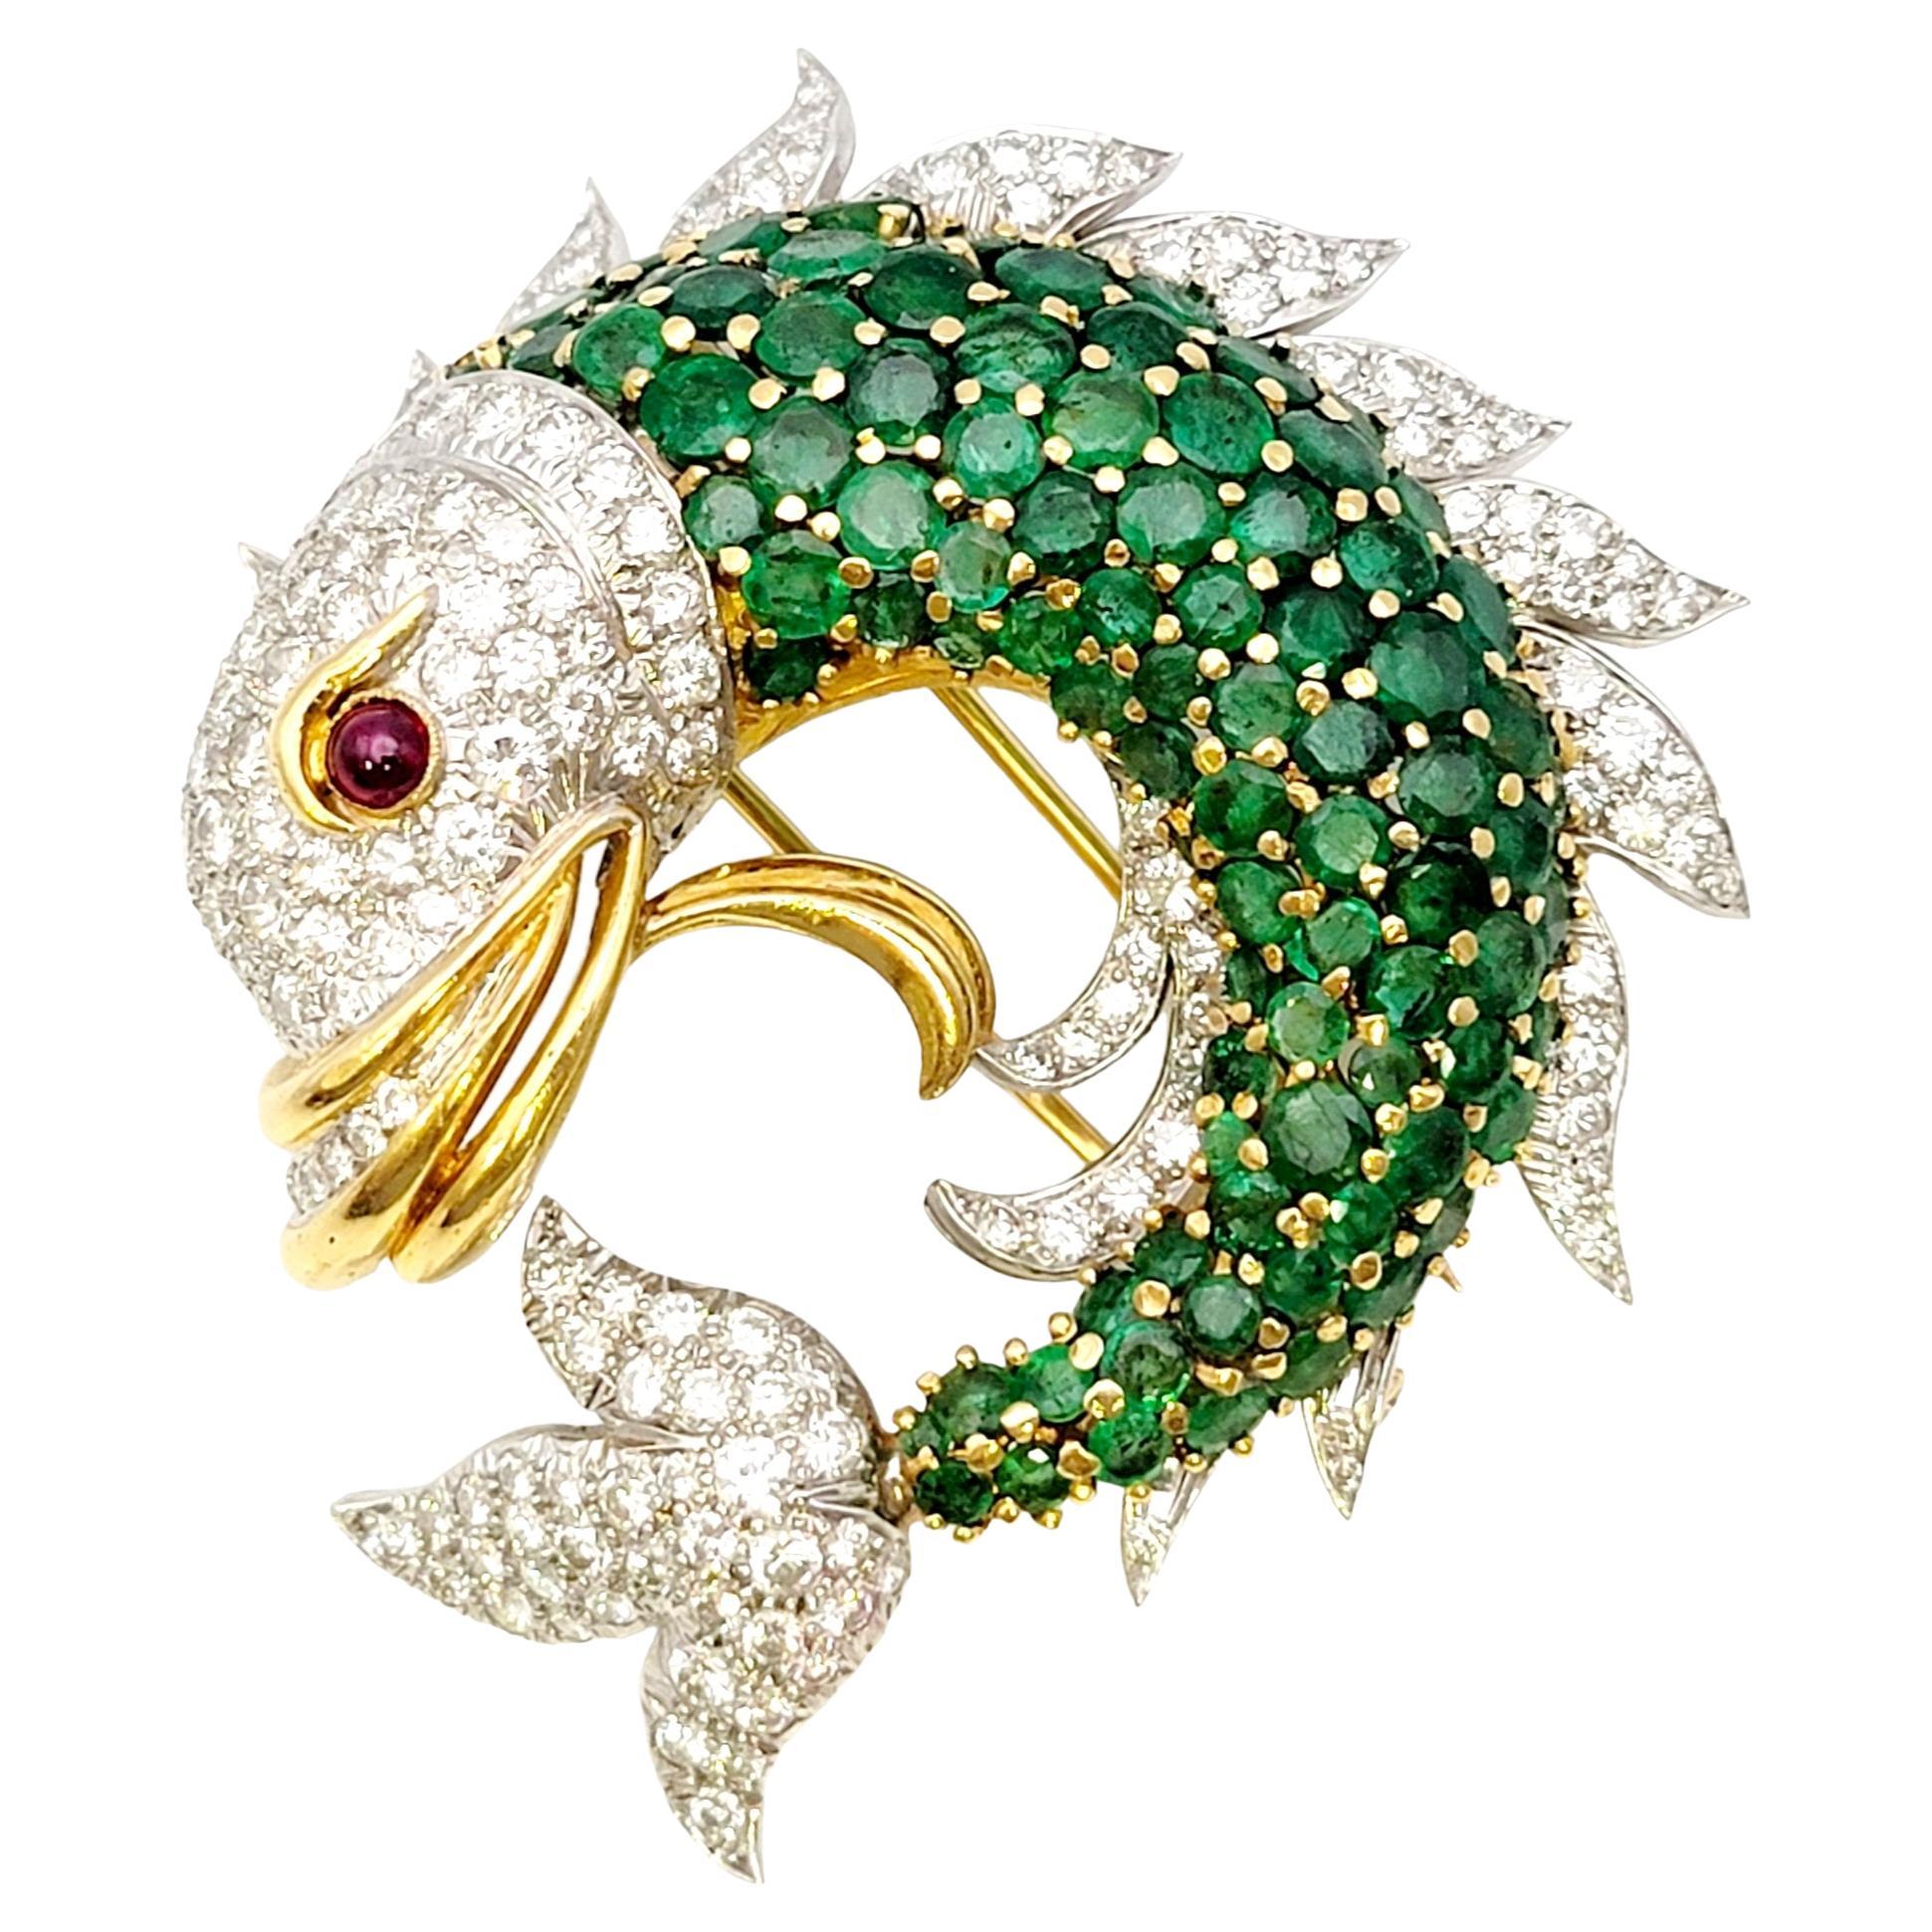 20.50 Carats Total Emerald, Diamond and Ruby Fish Brooch in 18 Karat Gold 